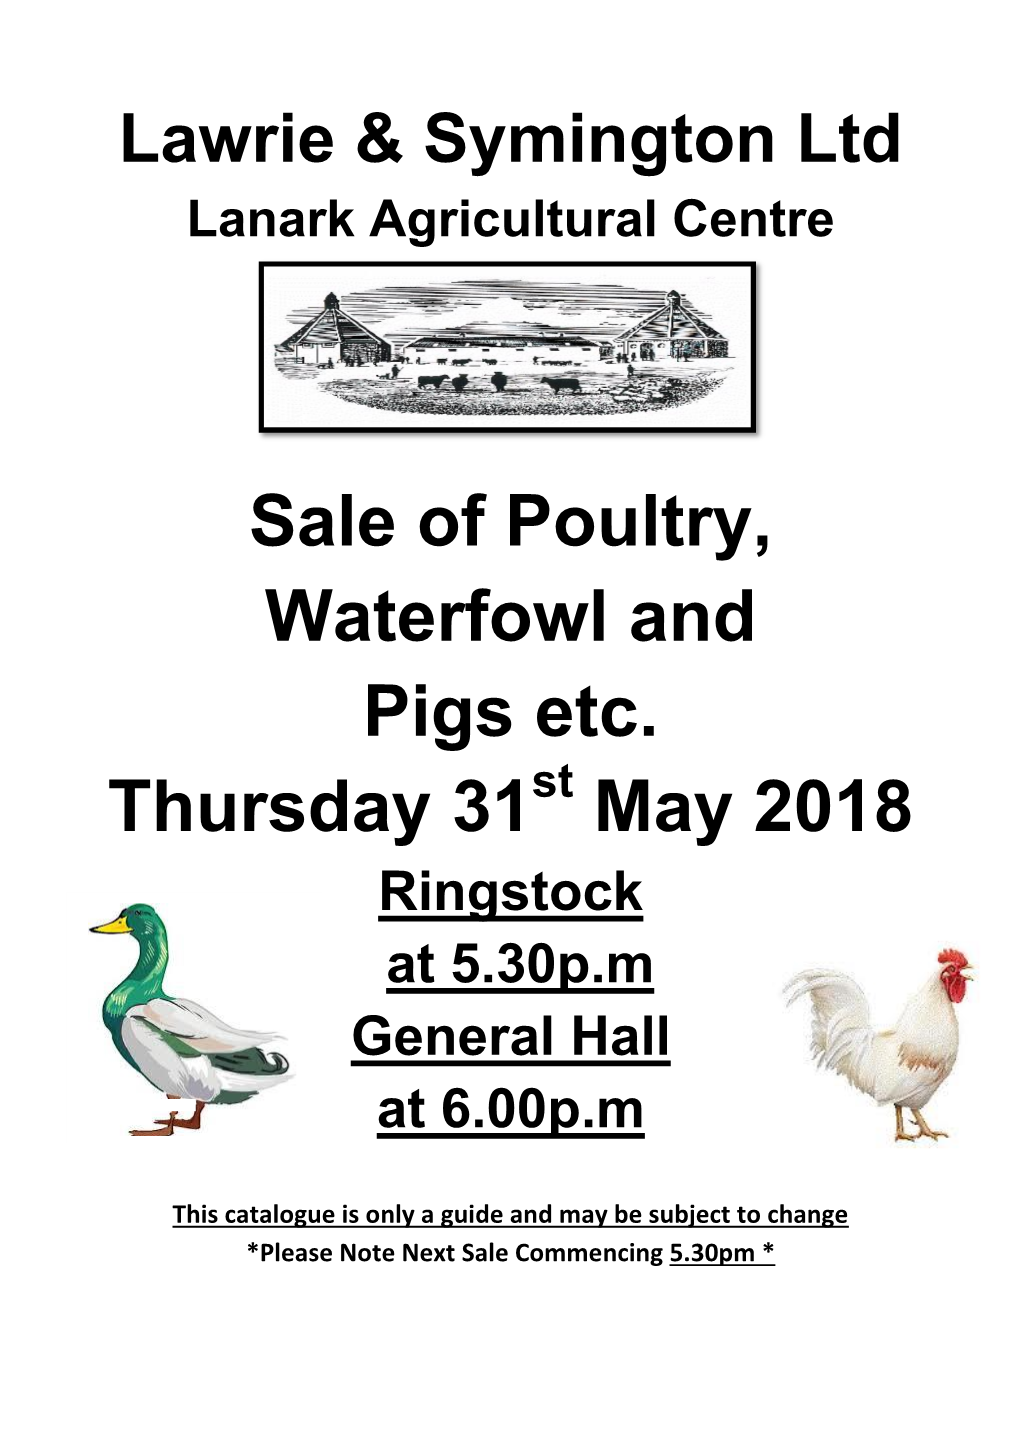 Sale of Poultry, Waterfowl and Pigs Etc. Thursday 31 May 2018